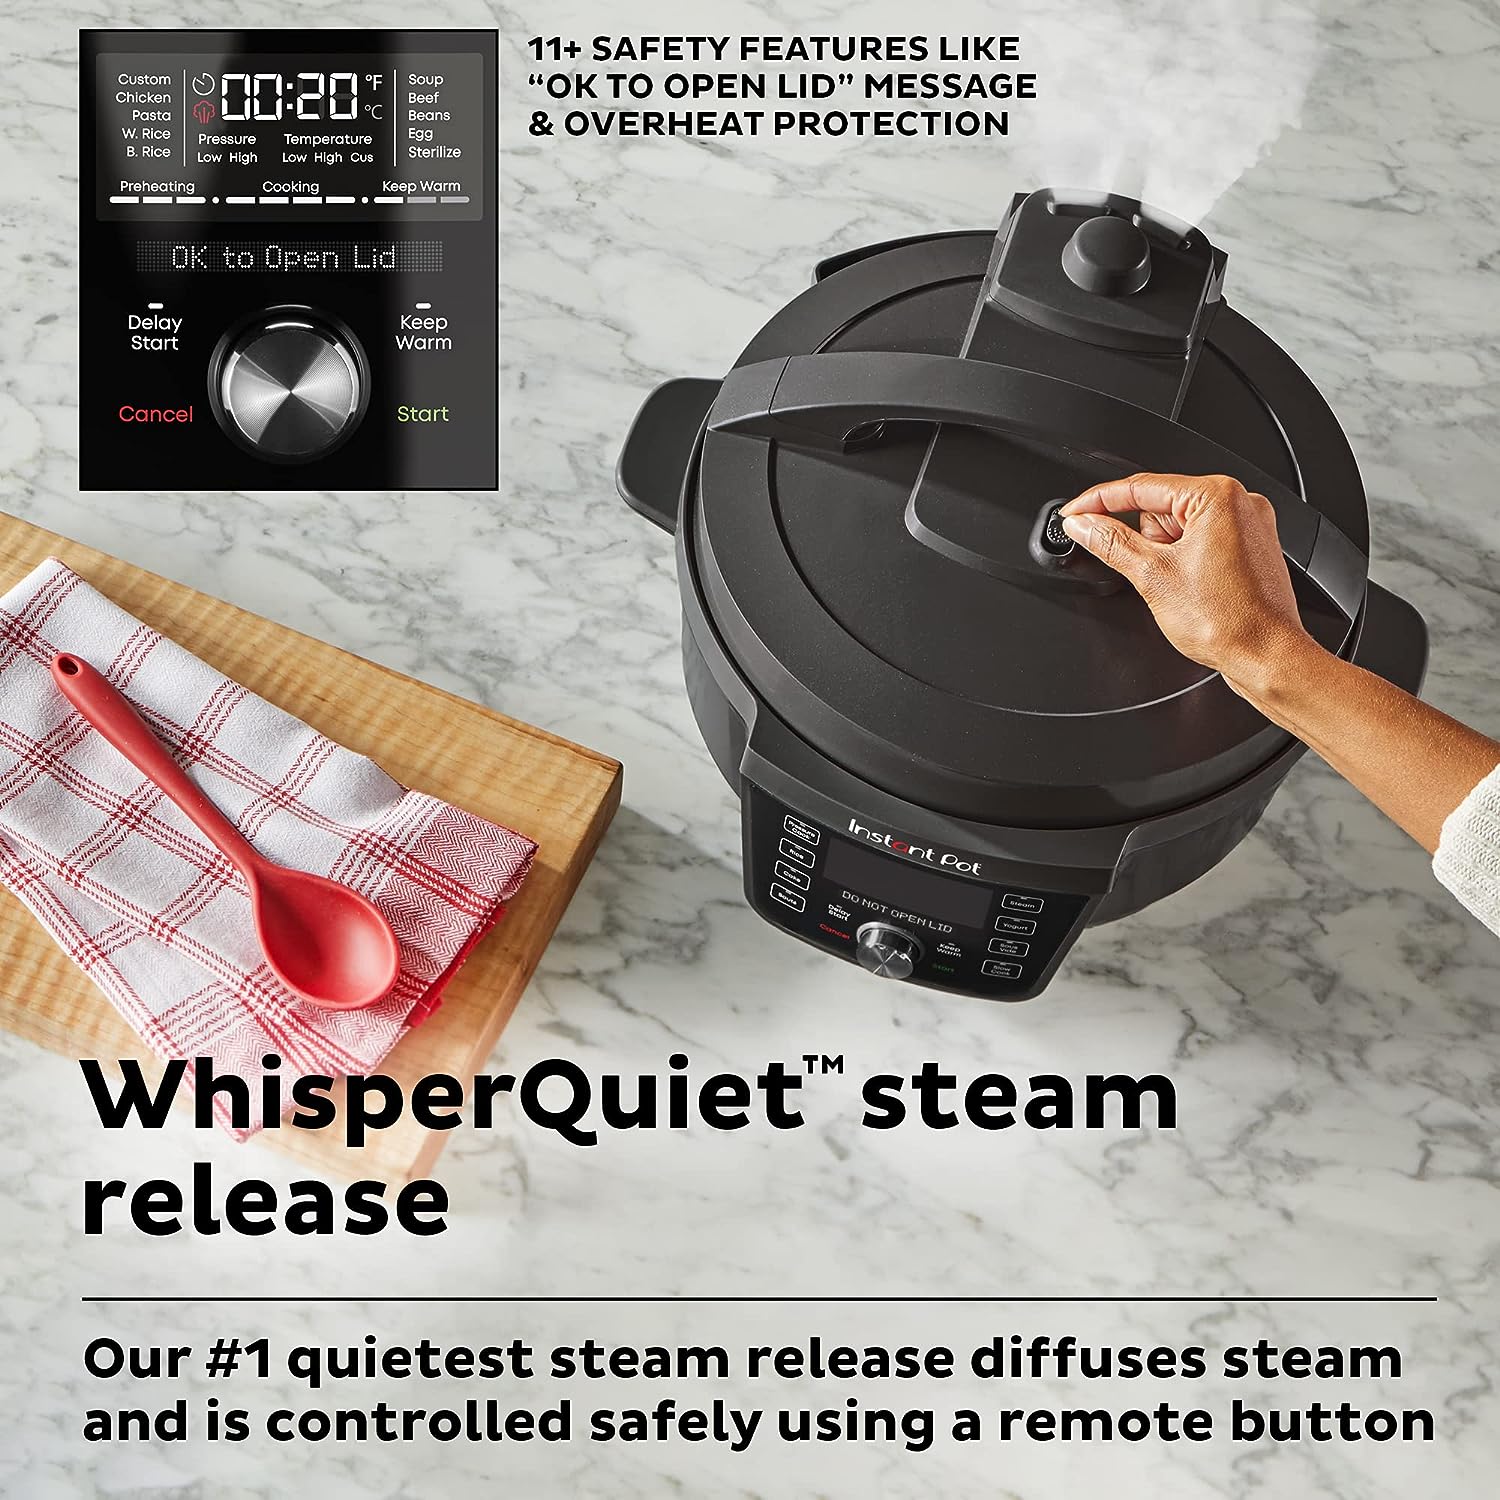 https://bigbigmart.com/wp-content/uploads/2023/08/Instant-Pot-RIO-Wide-Plus-7.5-Quarts-35-Larger-Cooking-Surface-WhisperQuiet-Steam-Release-9-in-1-Electric-Multi-Cooker-Pressure-Cooker-Slow-Cooker-Rice-Cooker-Steamer-Saute-Cake-Warmer5.jpg